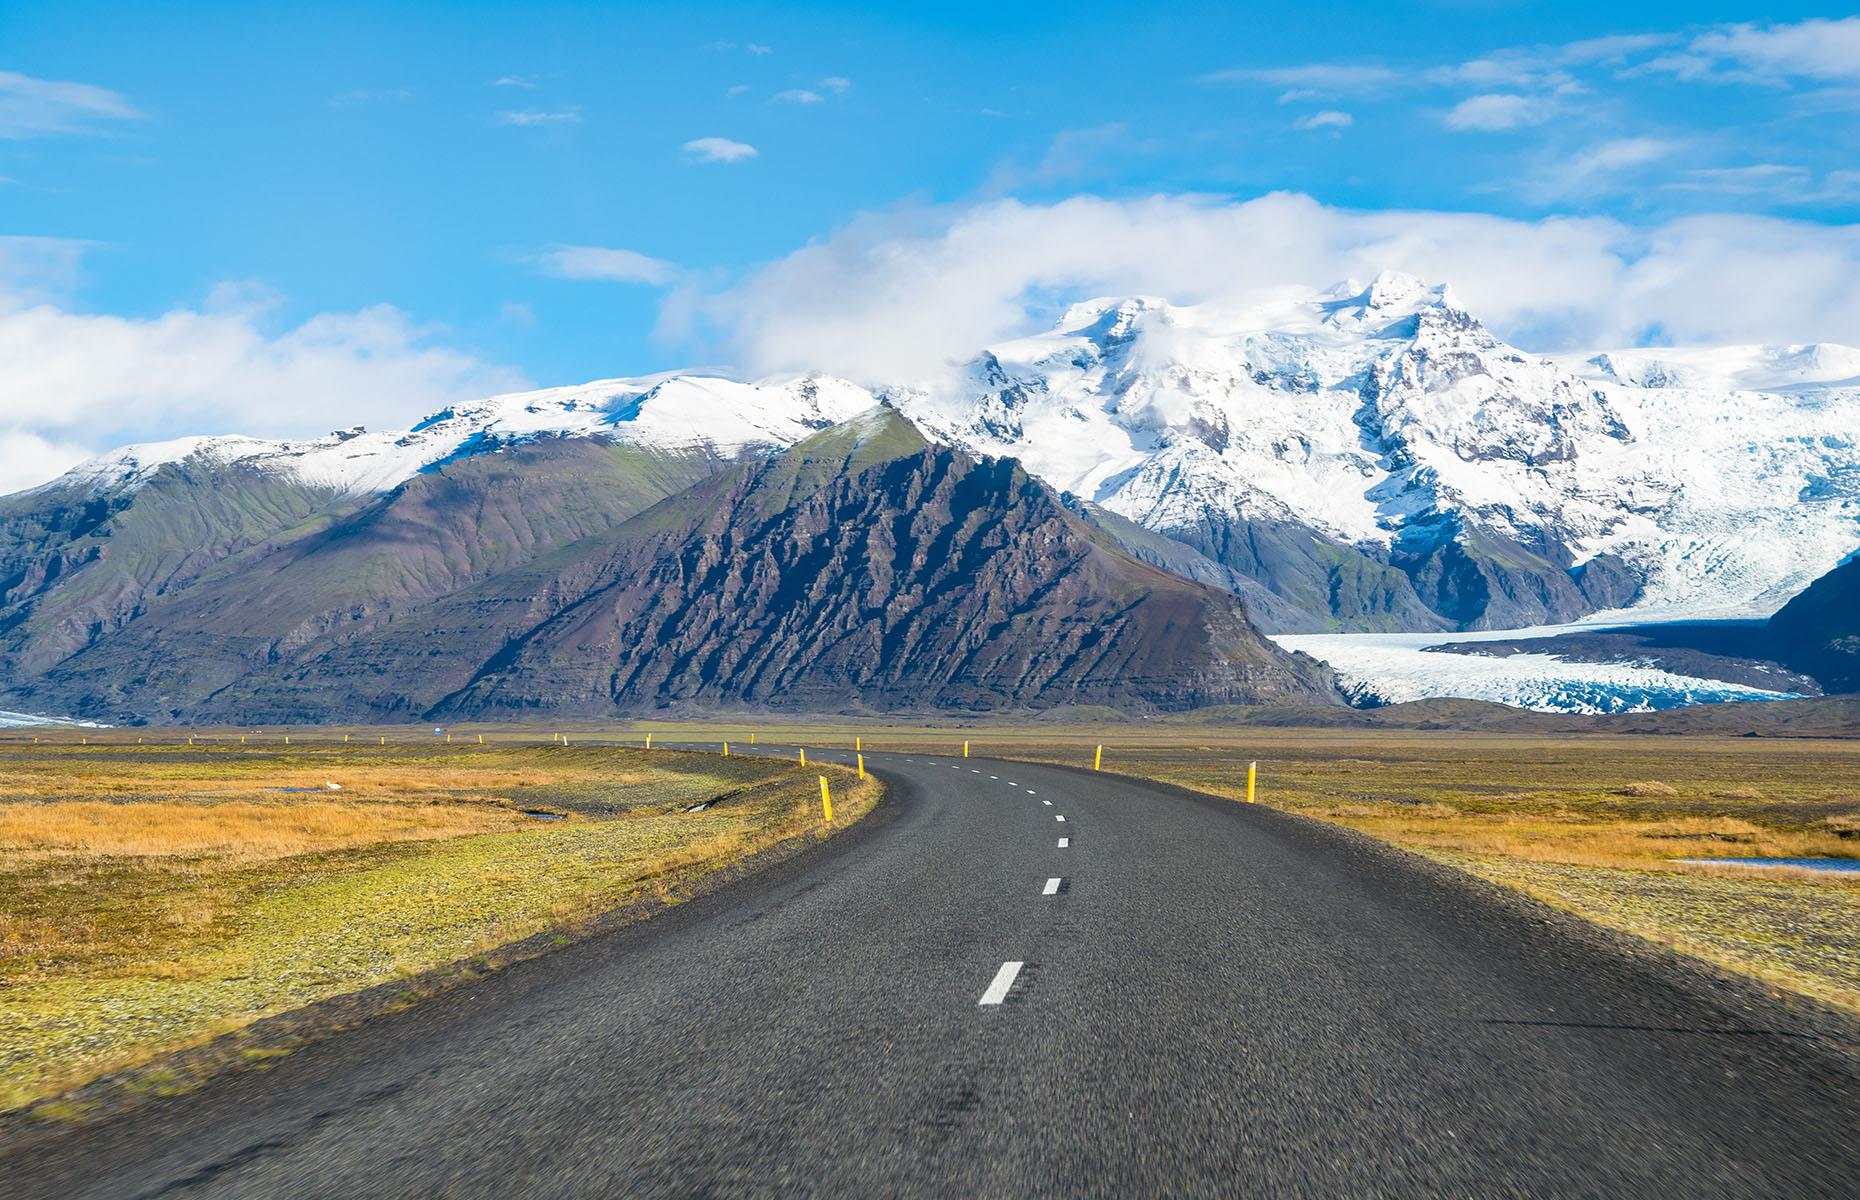 <p>From glistening ice caves to ebony beaches and sulphurous hot springs, an Icelandic road trip is a feast for all the senses. As its name suggests, the Ring Road circumnavigates the country, stretching for 828 miles (1,332km).</p>  <p>It’s wise to hire a 4X4 to make this road trip more comfortable and roads are infinitely more passable between April and September.</p>